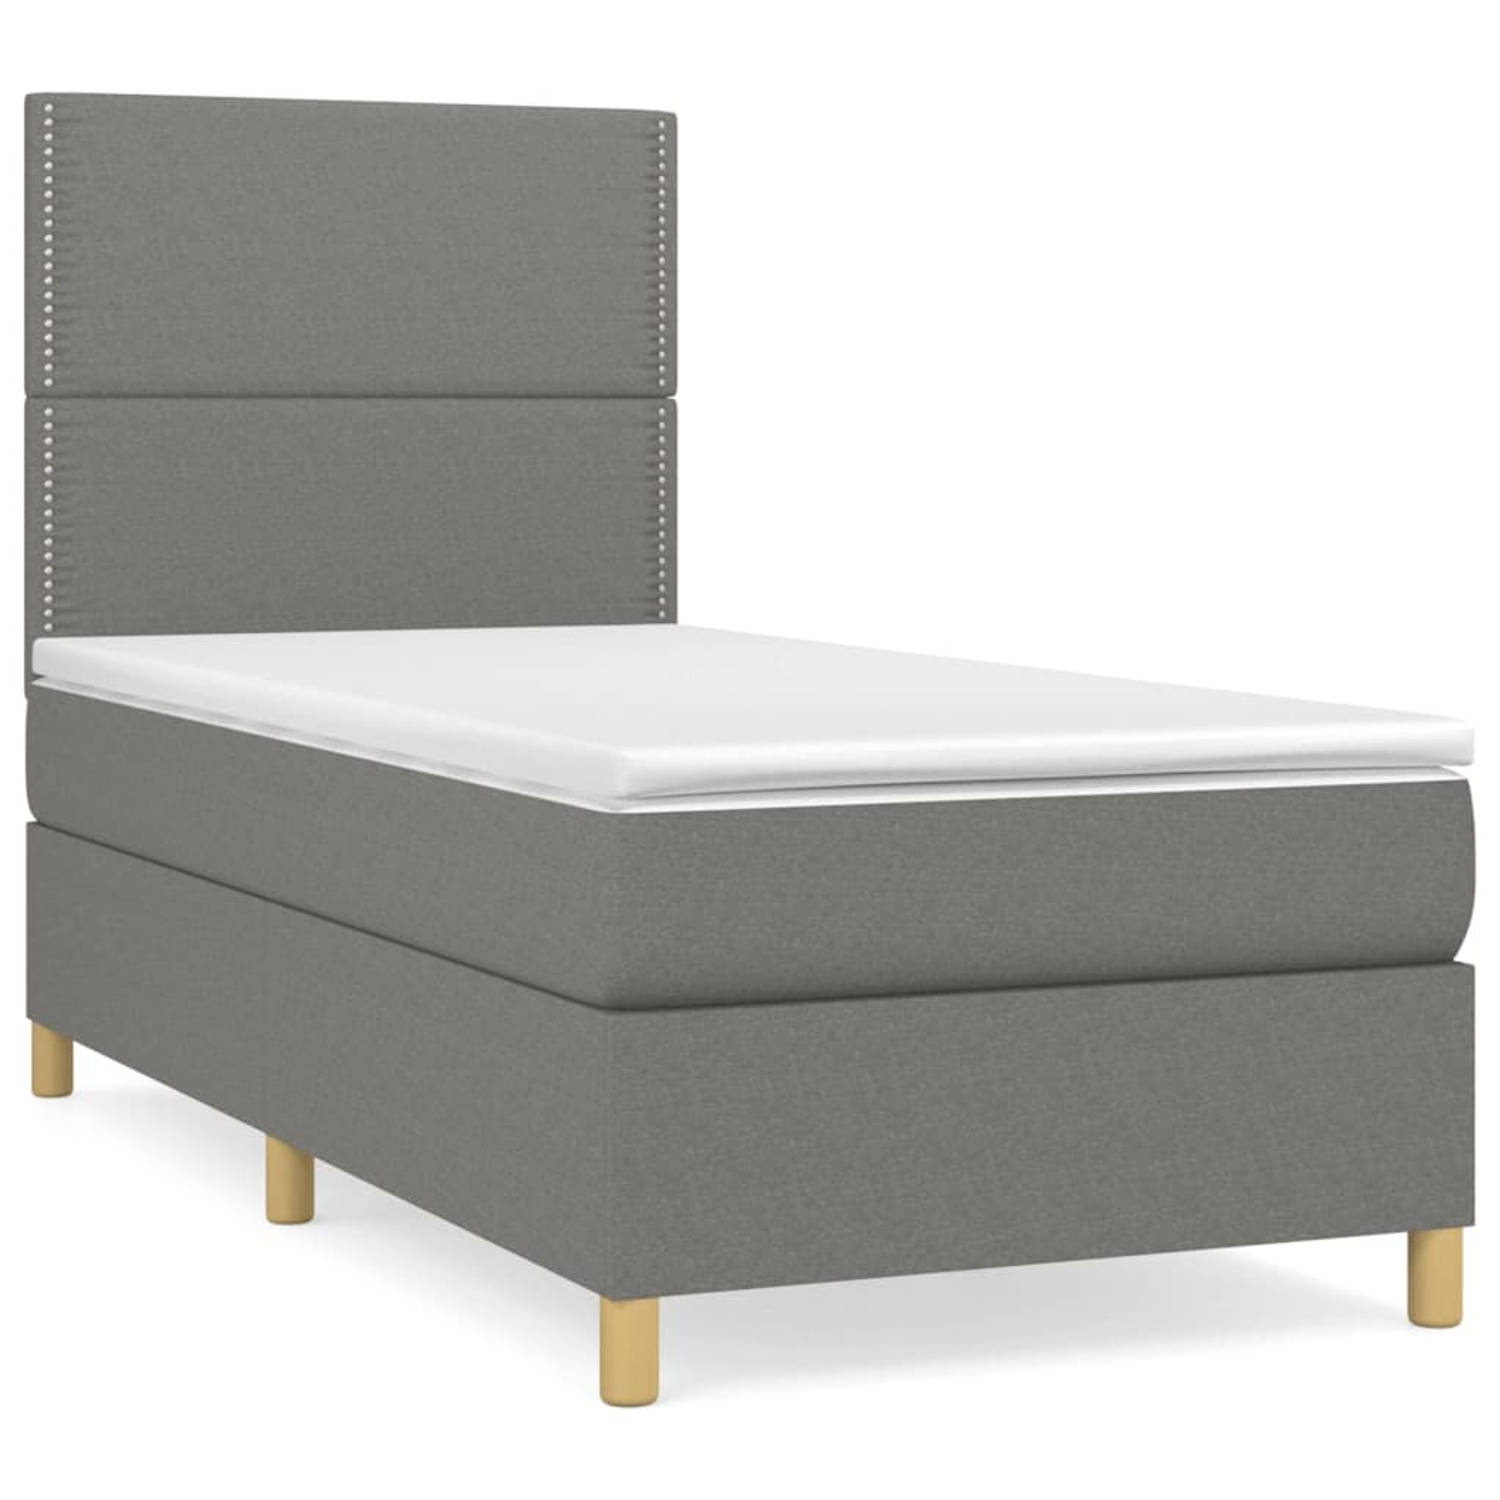 The Living Store Boxspringbed - Duurzaam - Bed - 203x90x118/128cm - Donkergrijs